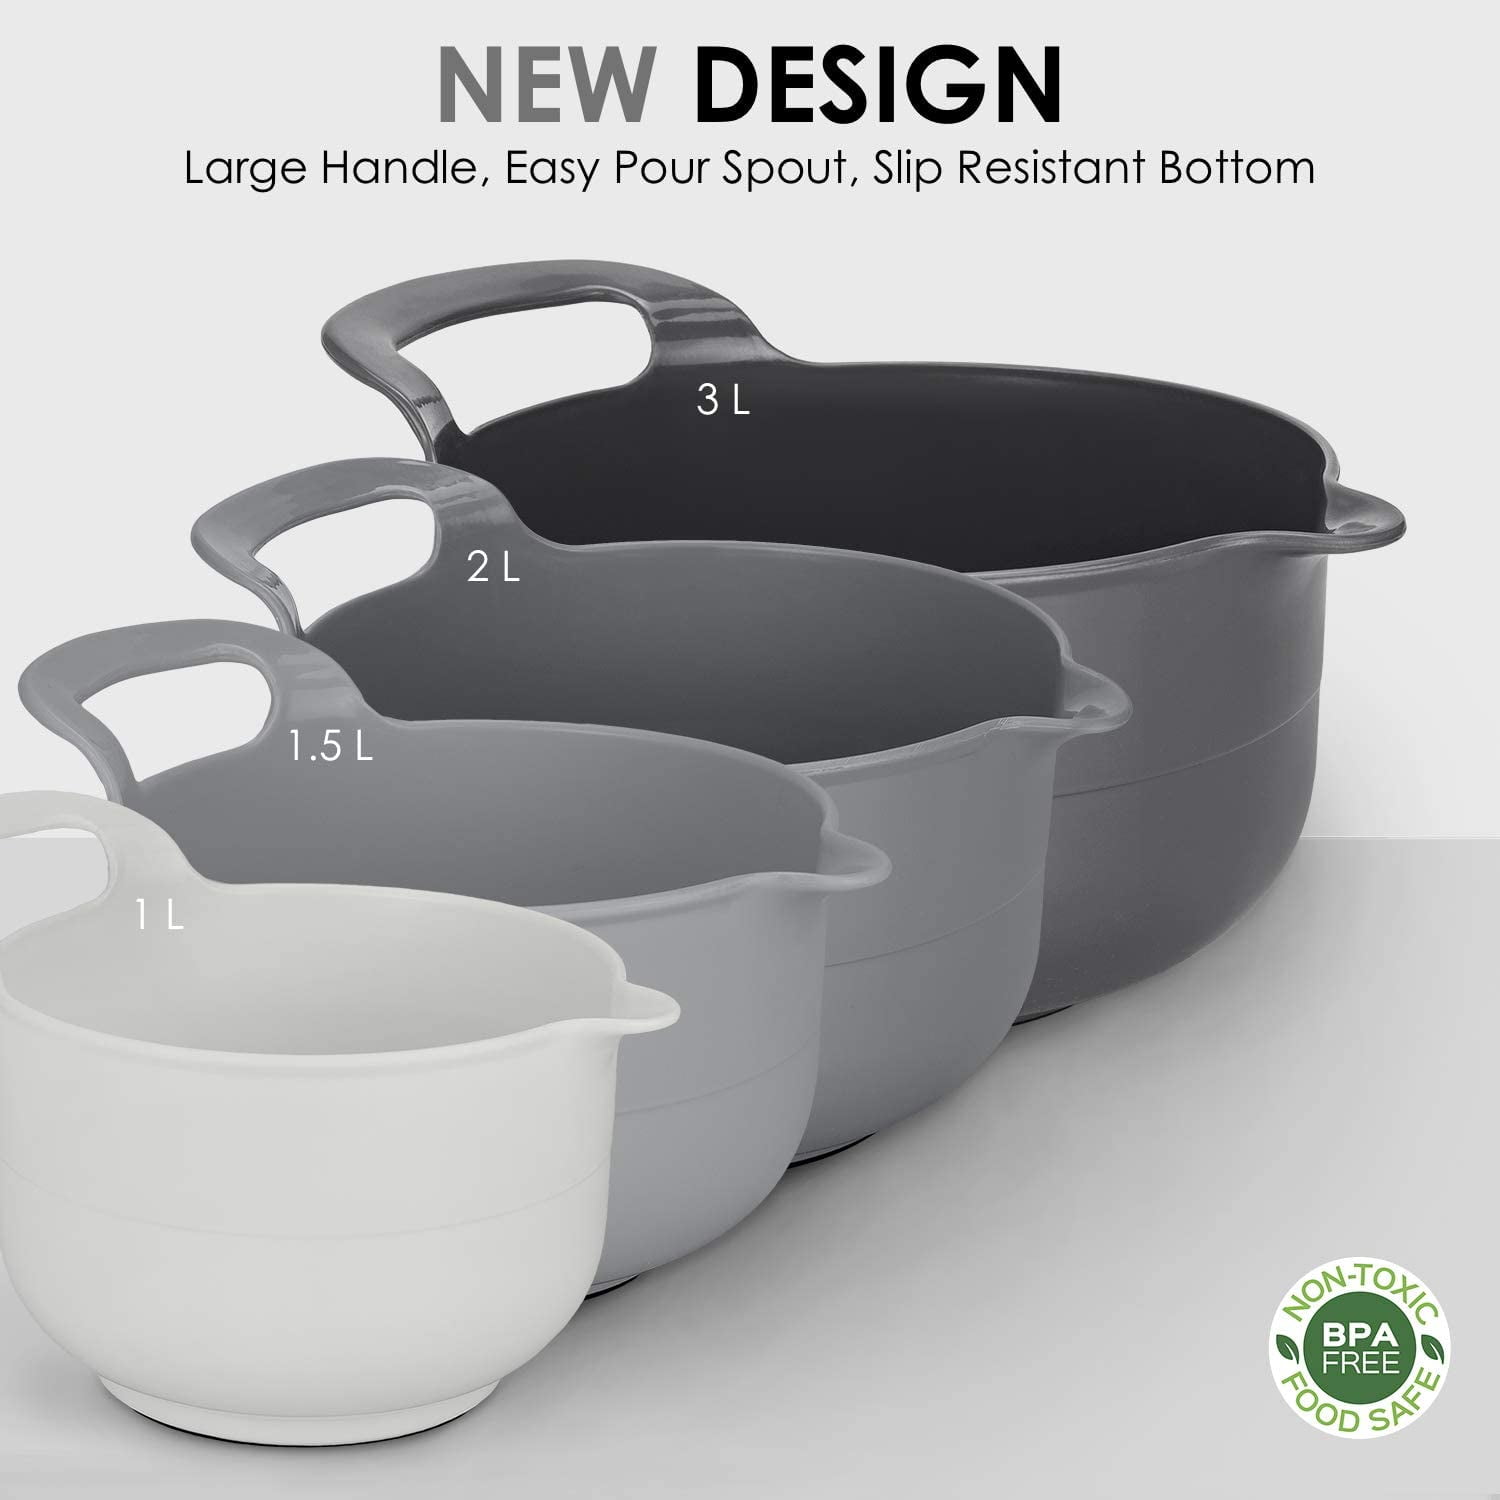 BoxedHome 8 Pack Classic Nesting Mixing Bowl Set with 4 Measuring Cups Mixing Bowls with Pour Spouts and Handles(Gray)